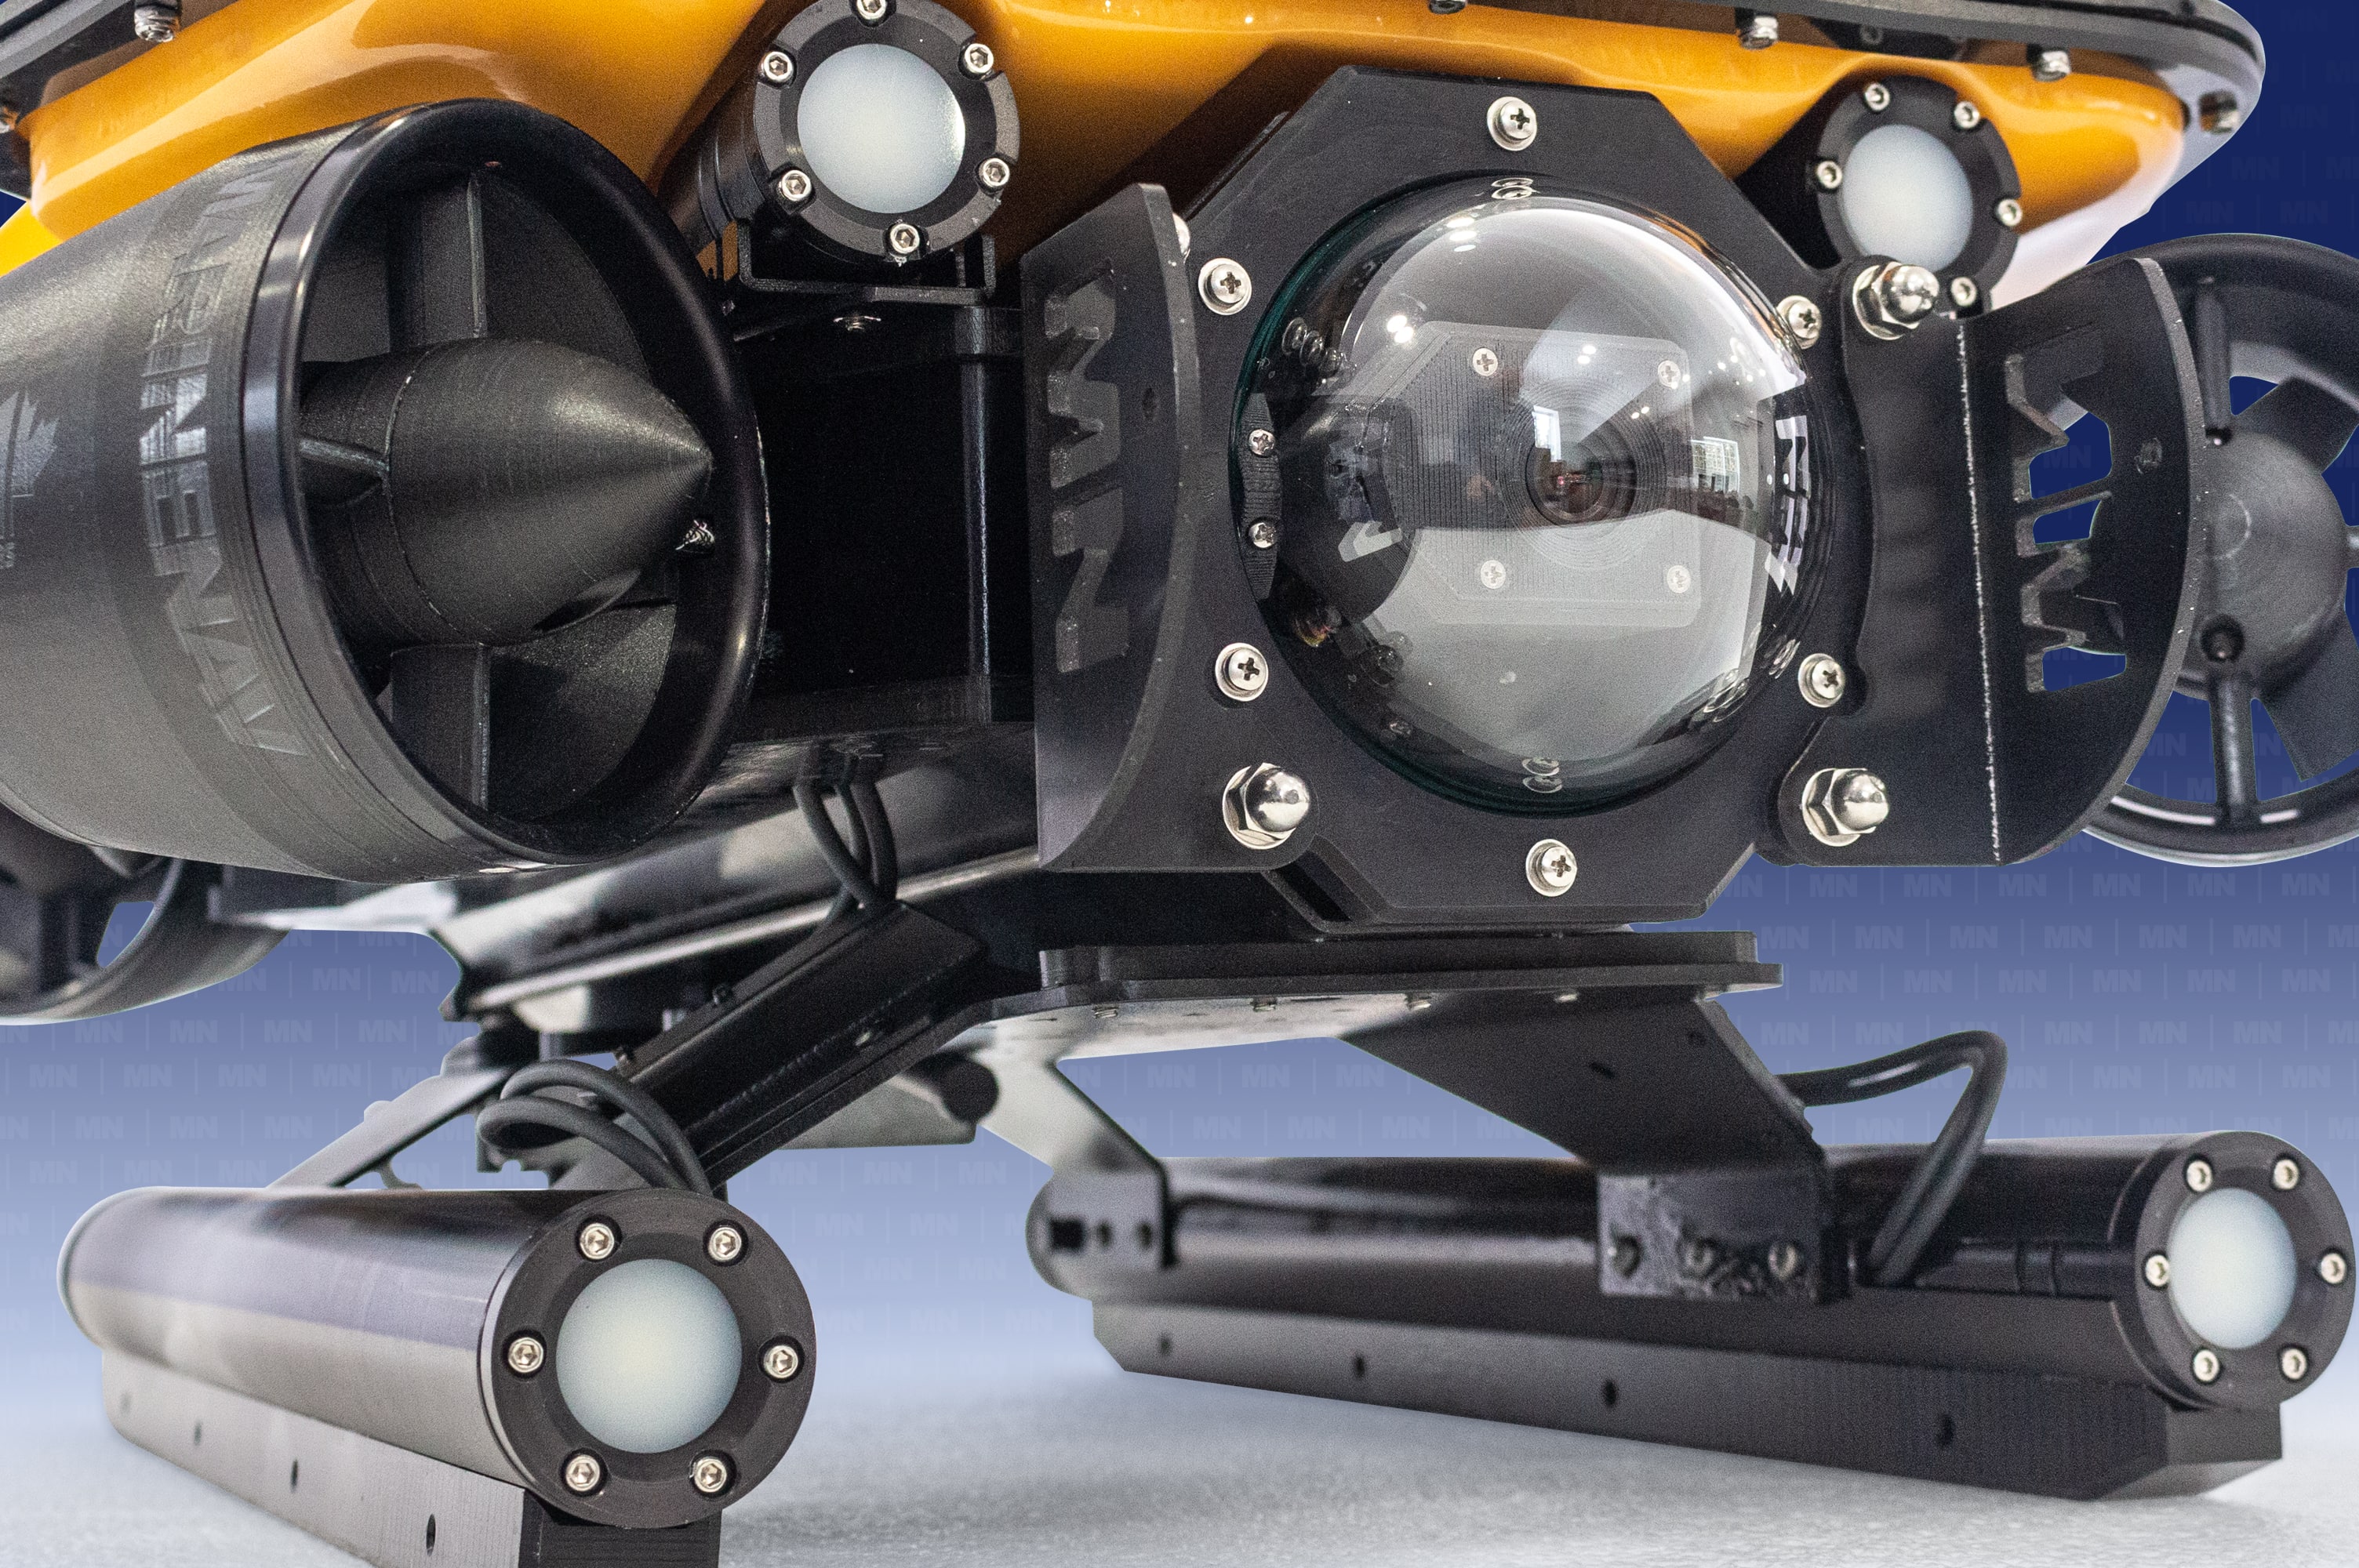 ROV chassis is manufactured from anodized metal components and other marine-grade materials.